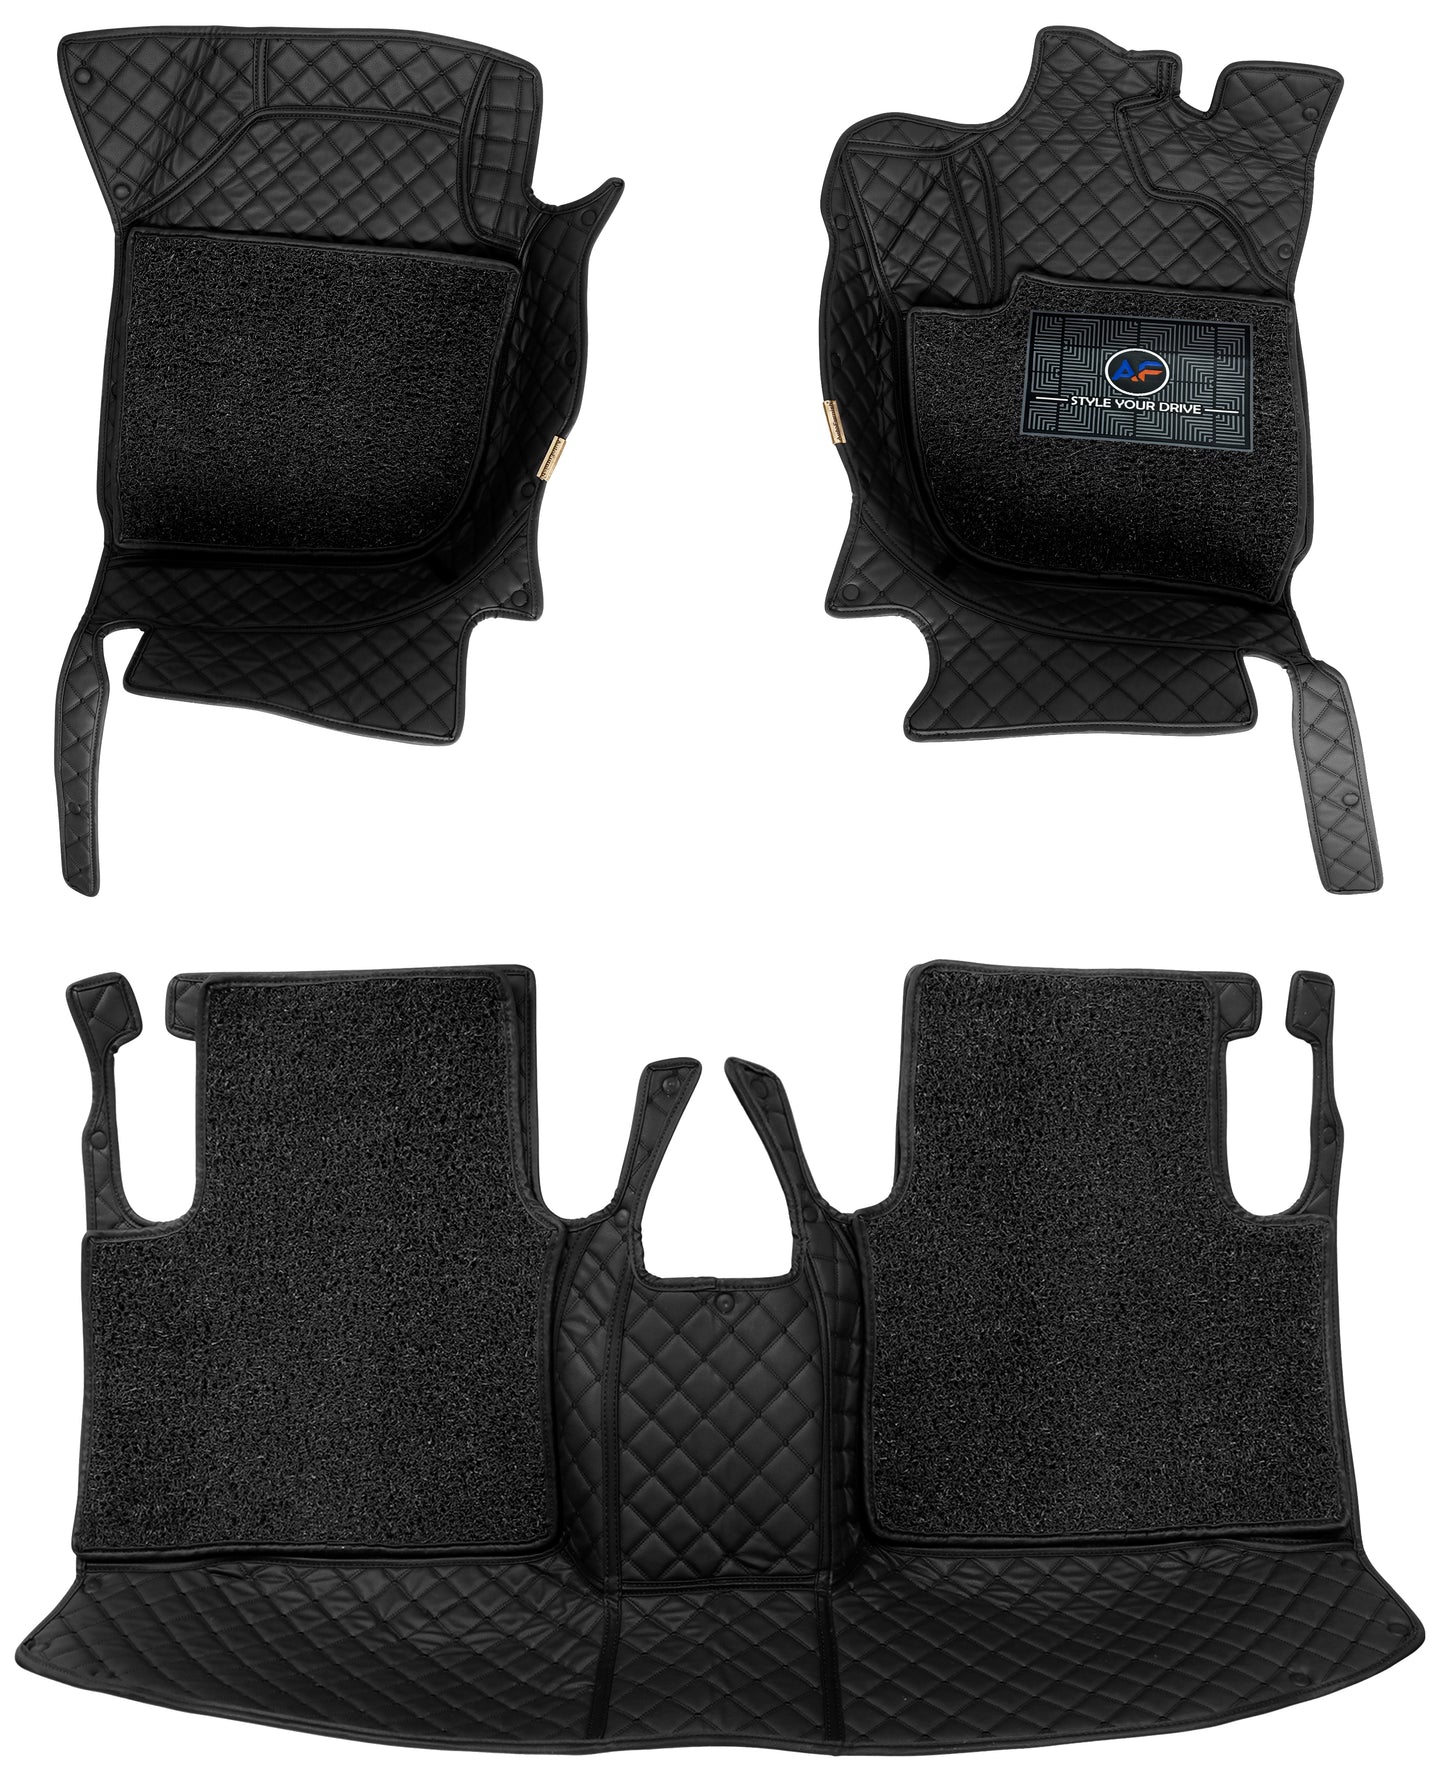 Nissan Micra (2014-18)-7D Luxury Car Mat, All Weather Proof, Anti-Skid, 100% Waterproof & Odorless with Unique Diamond Fish Design (24mm Luxury PU Leather, 2 Rows)